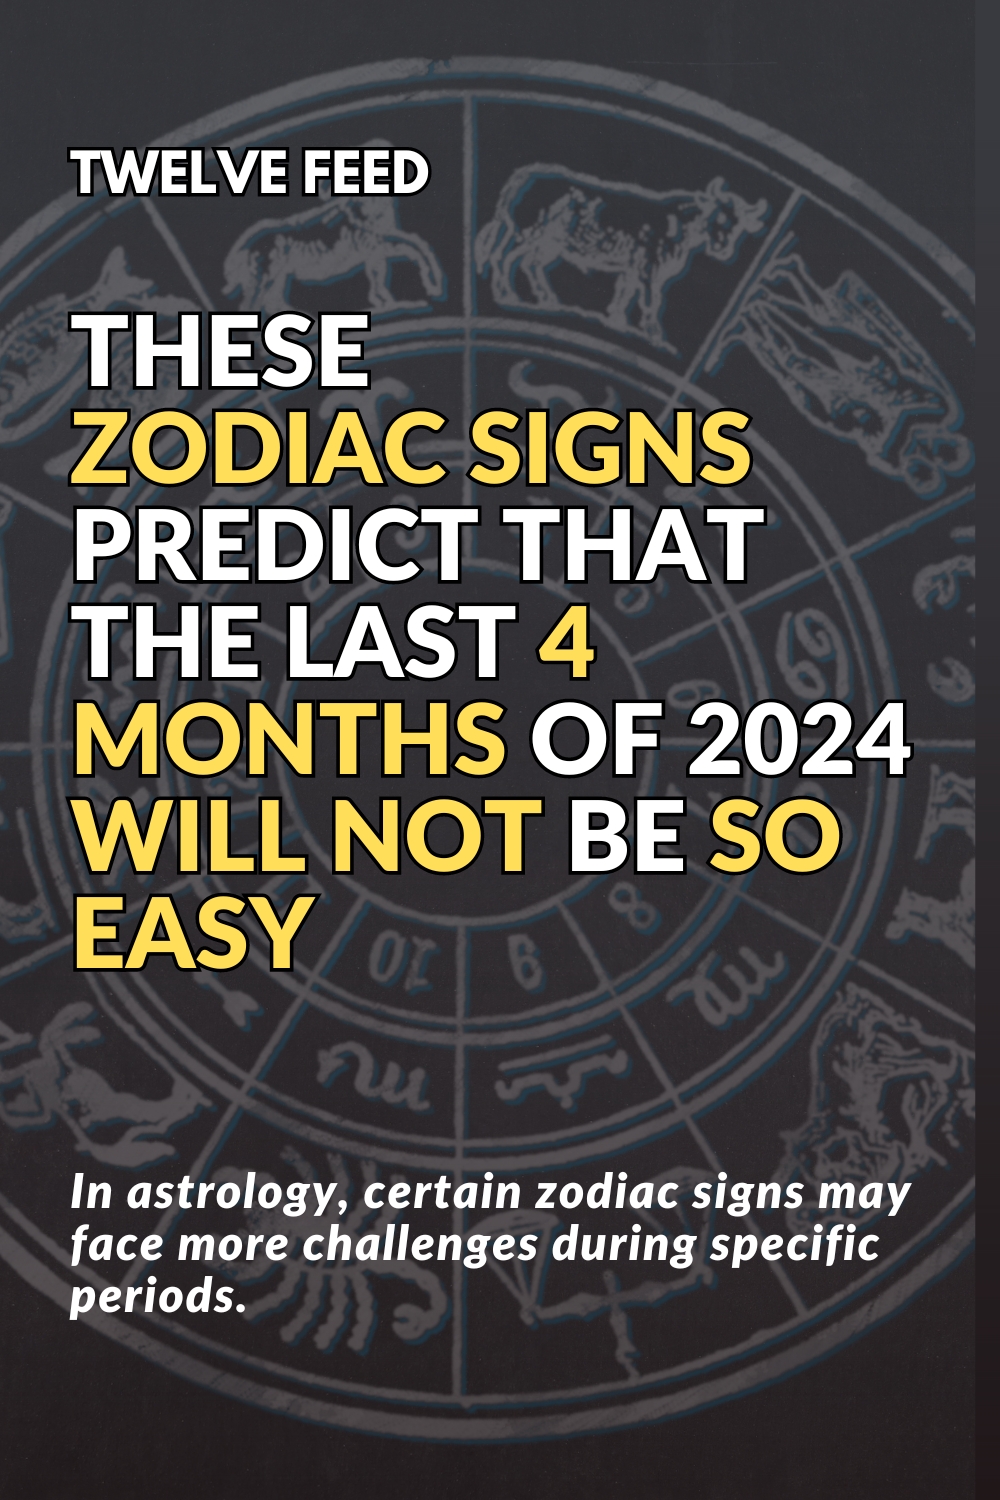 These Zodiac Signs Predict That The Last 4 Months of 2024 Will Not Be So Easy For The Following 3 Signs